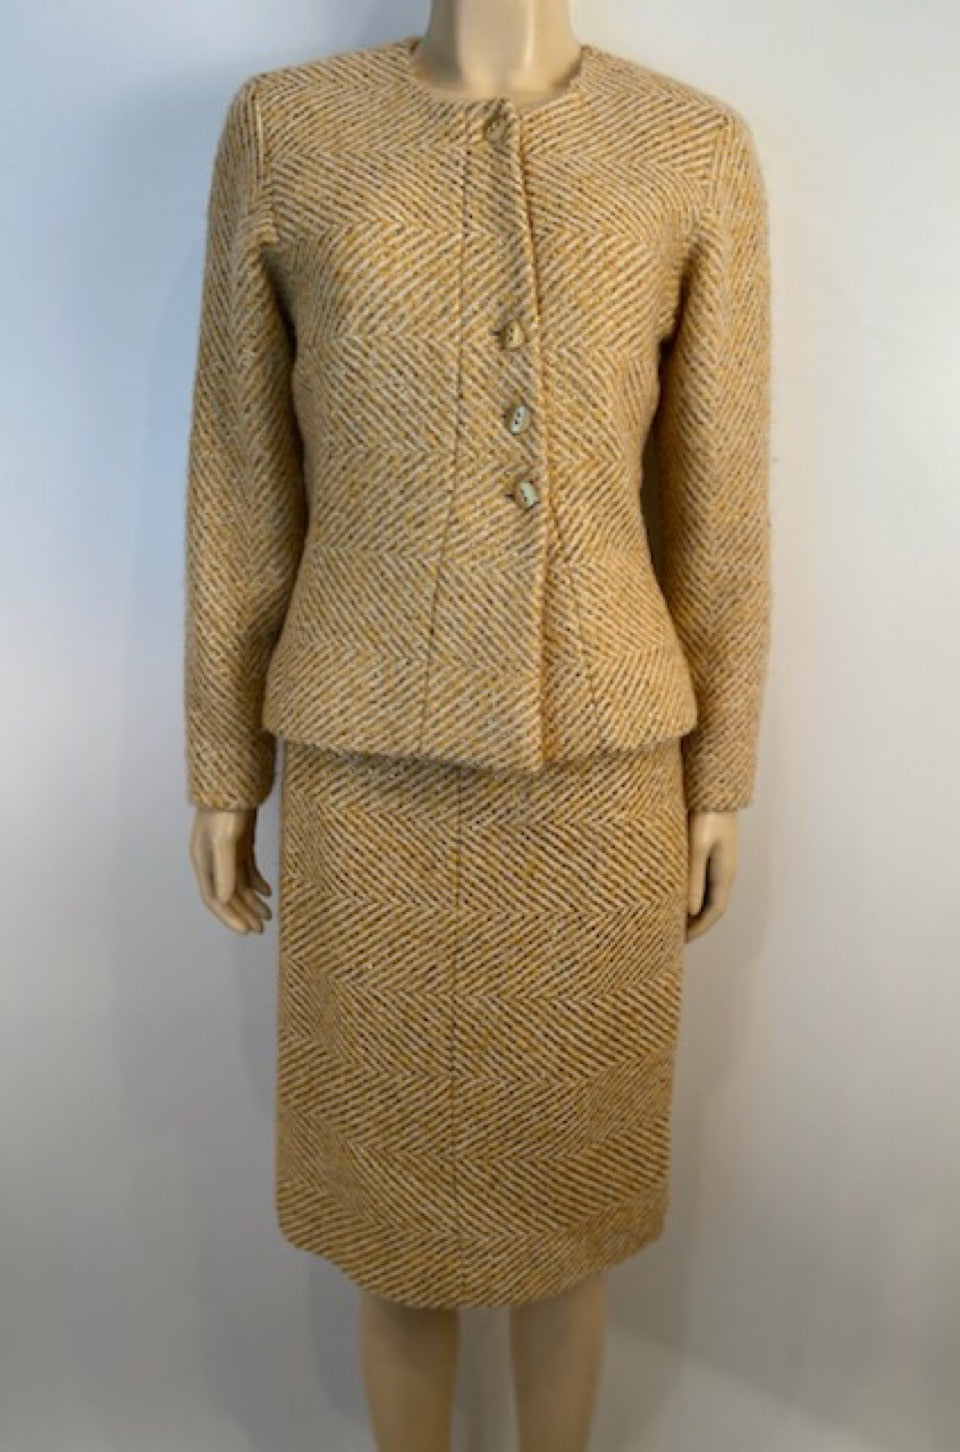 CHANEL, IVORY TWEED SKIRT SUIT